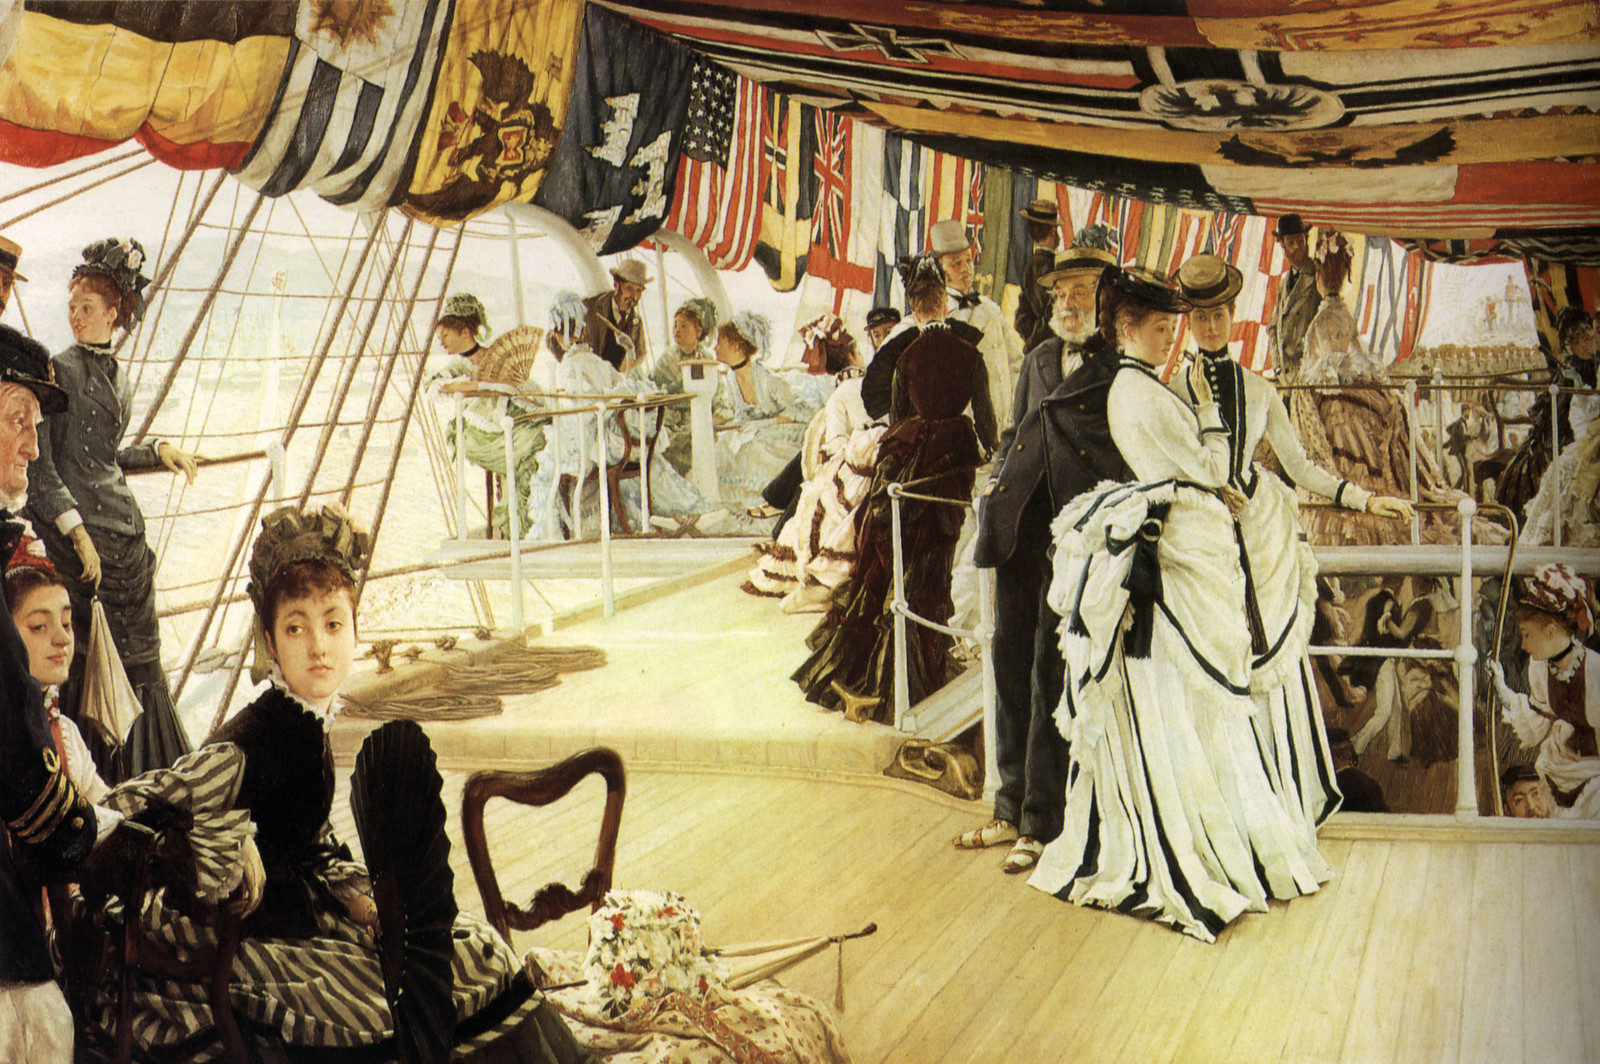 The Ball on Shipboard by James Tissot, 1874